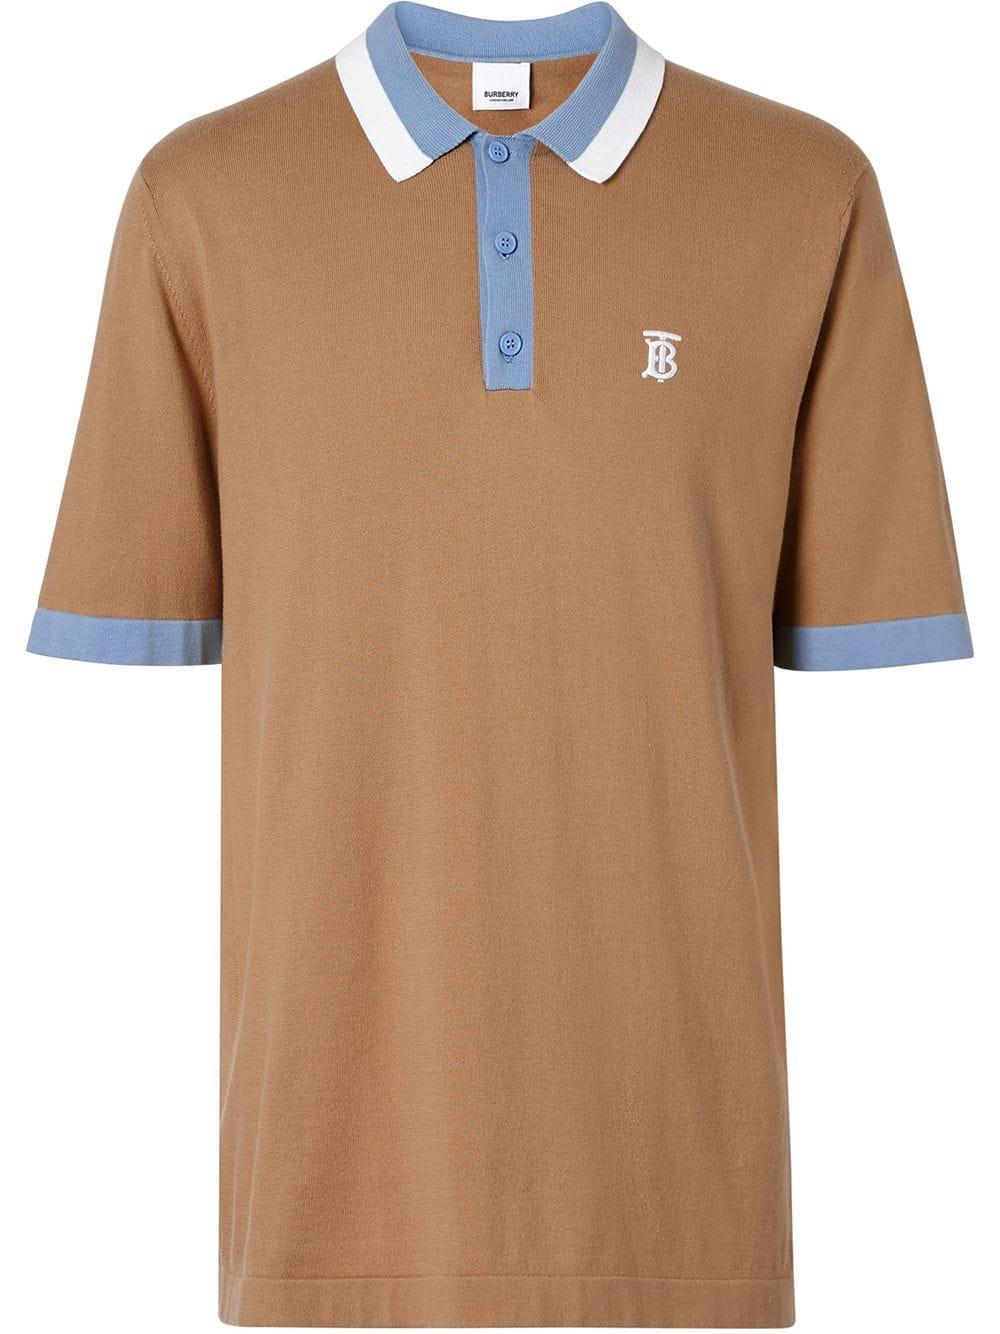 Burberry Monogram Motif Tipped Cotton Polo Shirt in Brown for Men - Lyst